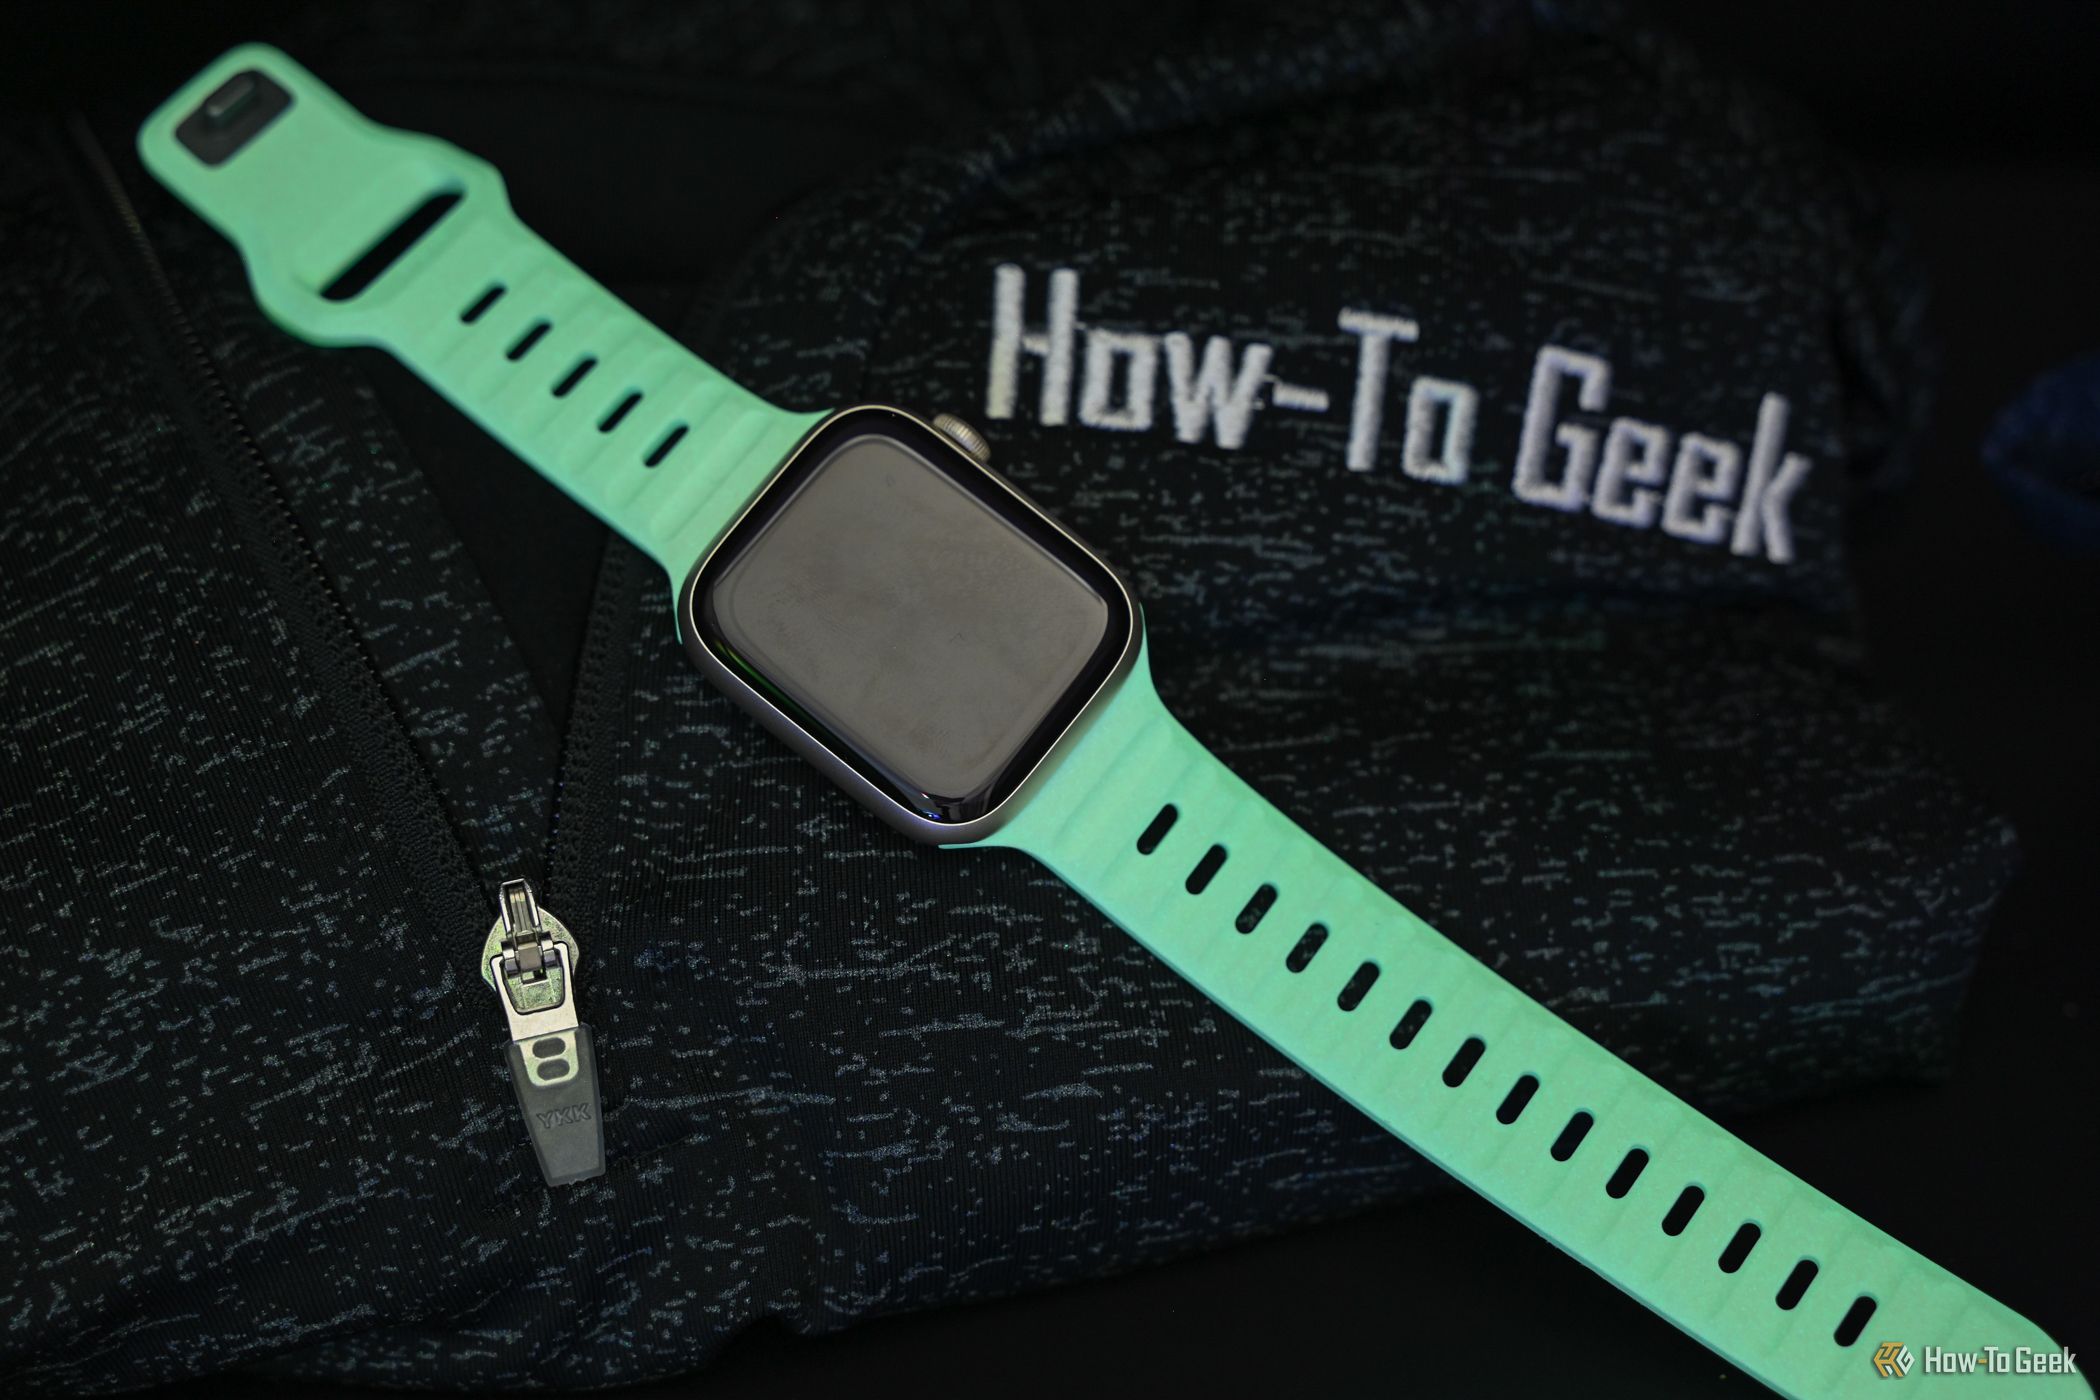 The Glow in the Dark Sport Band laying in the dark glowing green